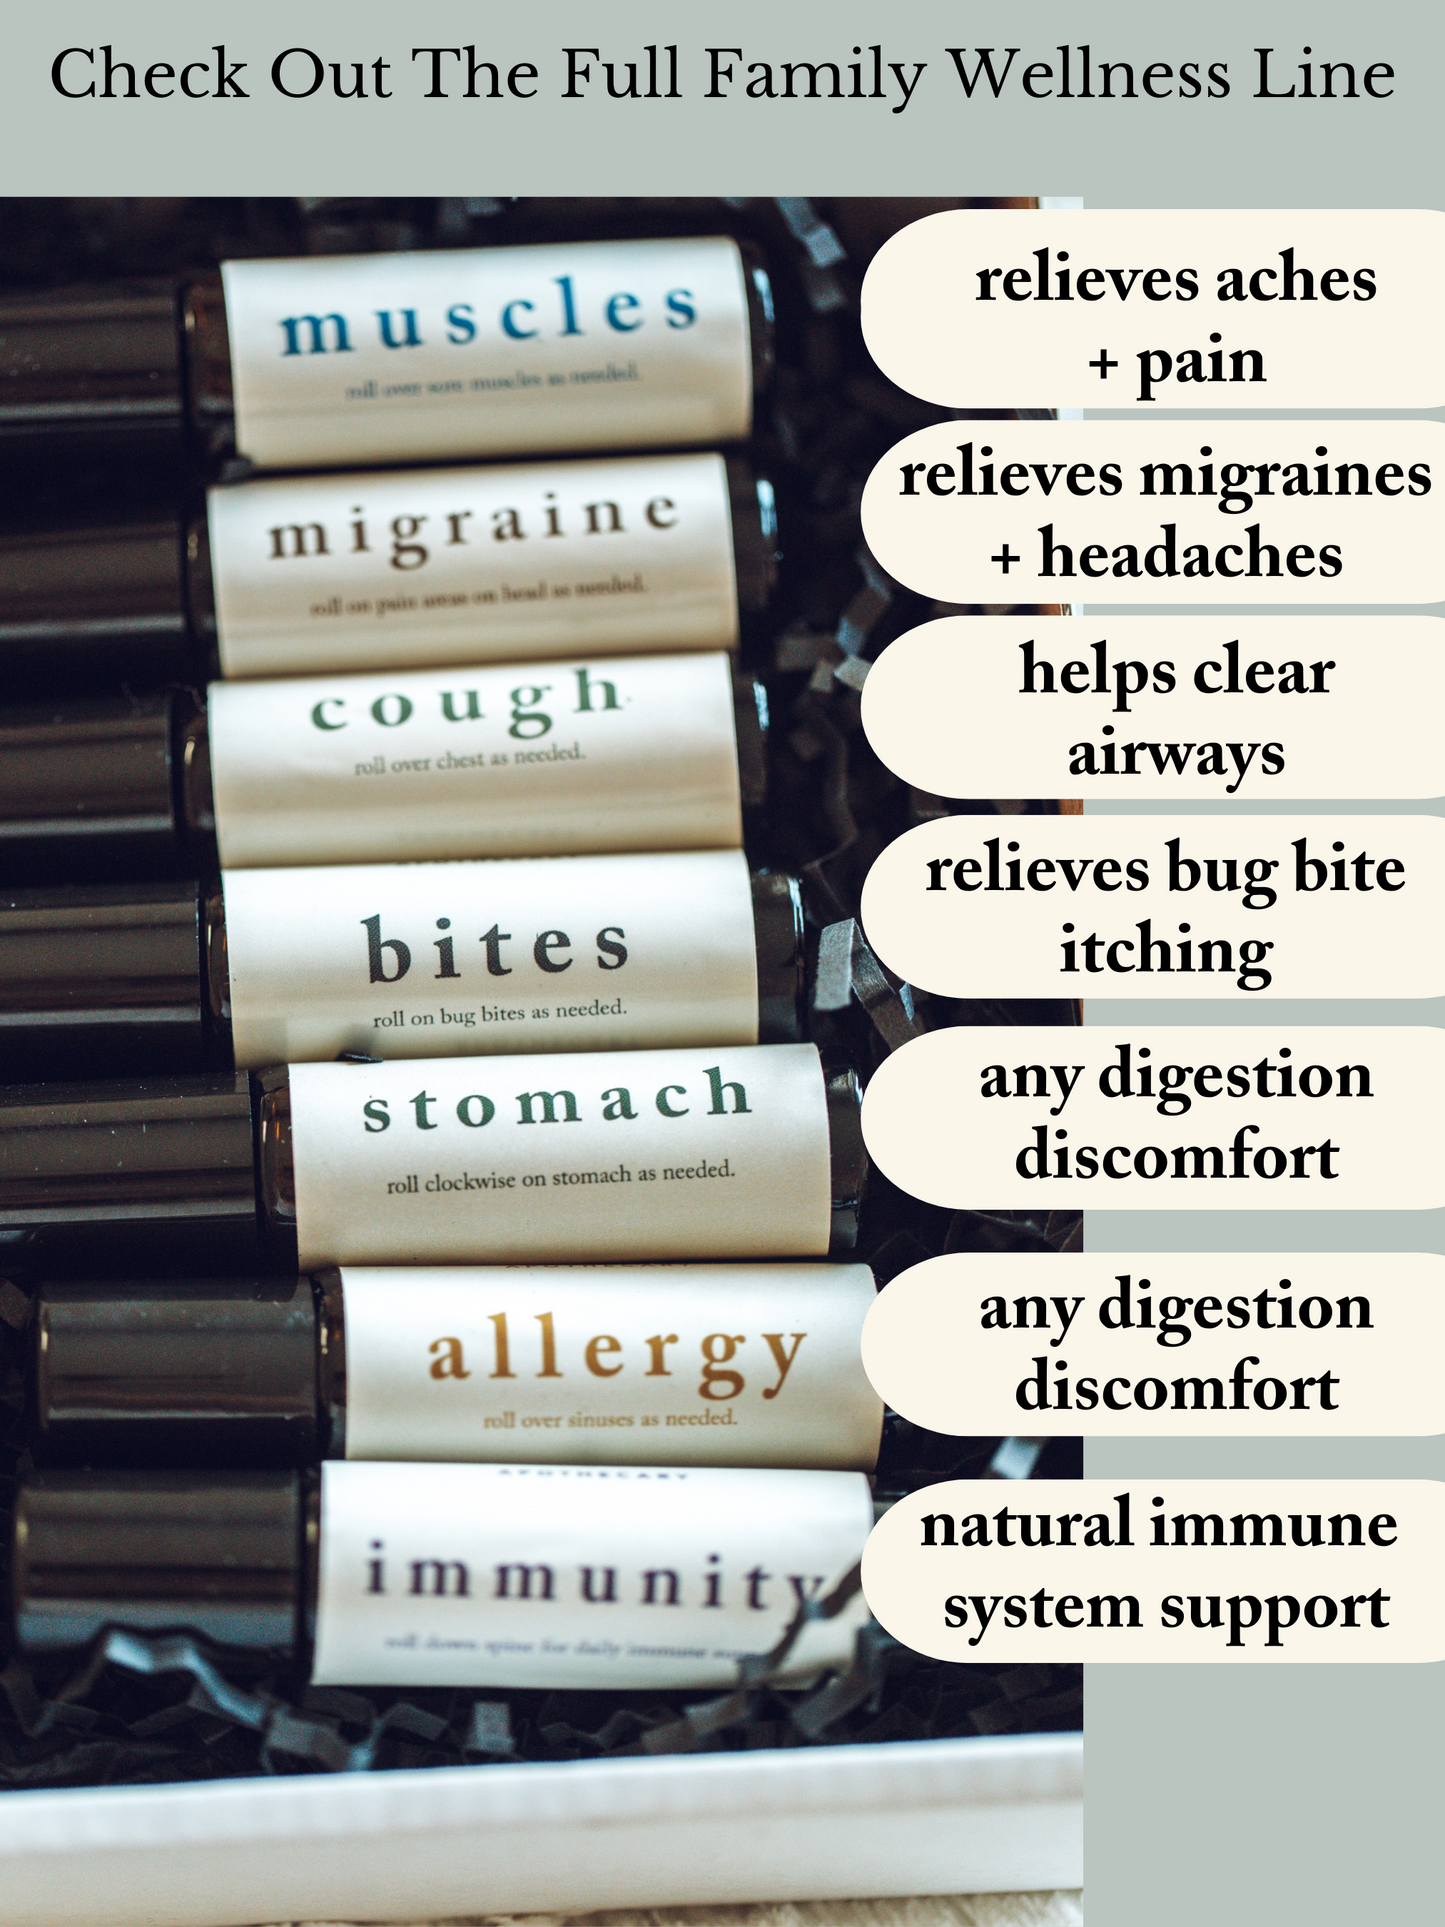 Migraine Essential Oil Roll-On 10 ml | Migraine Essential Oil Blends | Headache Roll On | Aromatherapy | Migraine Roller | Tension Roll On